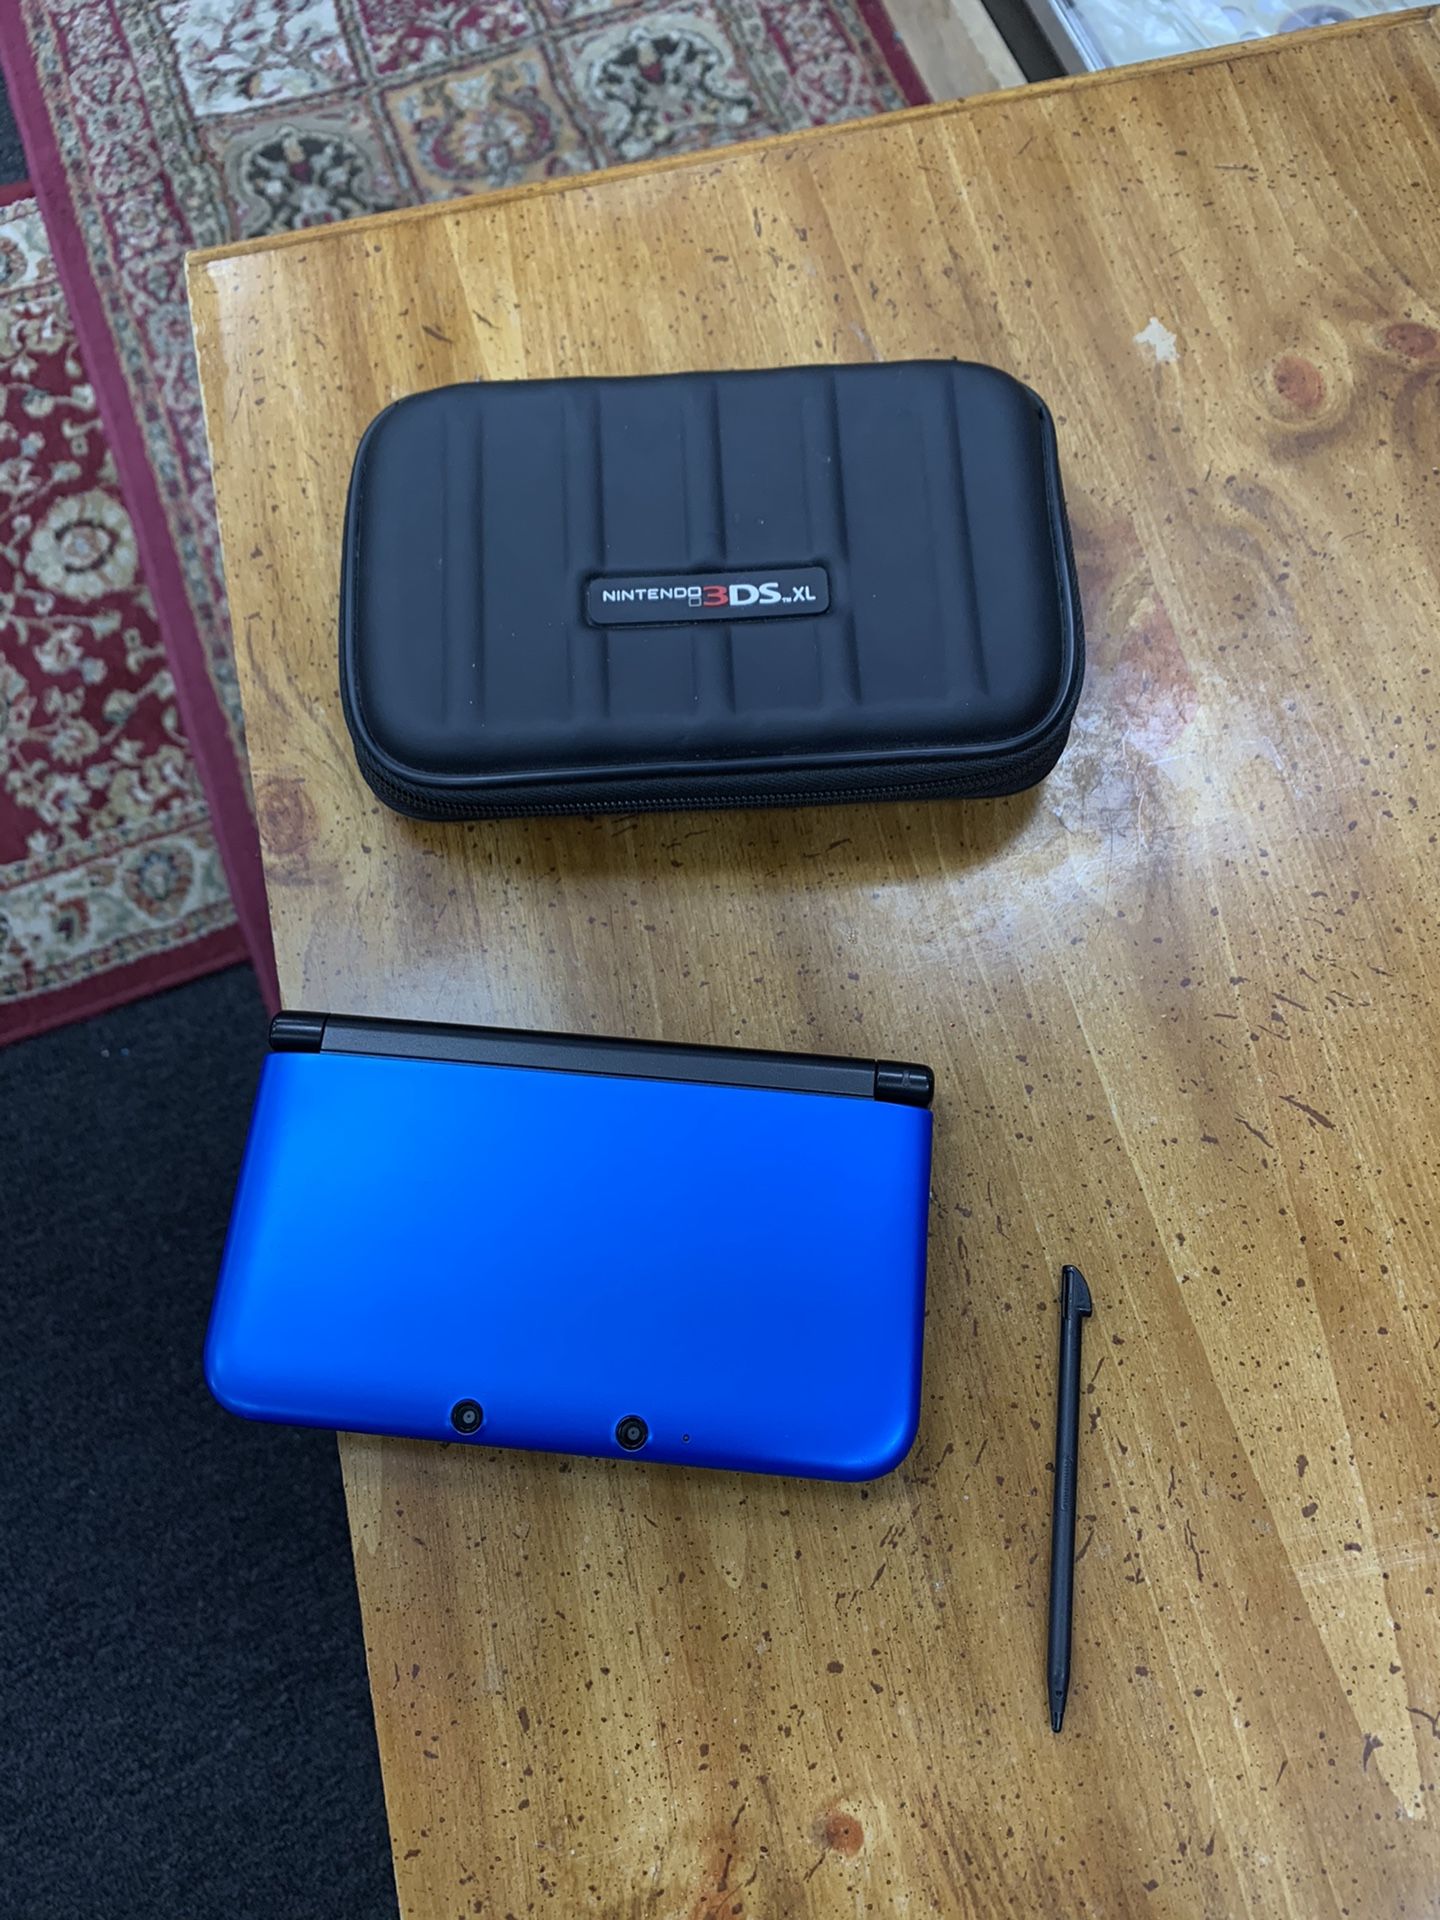 Nintendo 3DS XL with Case